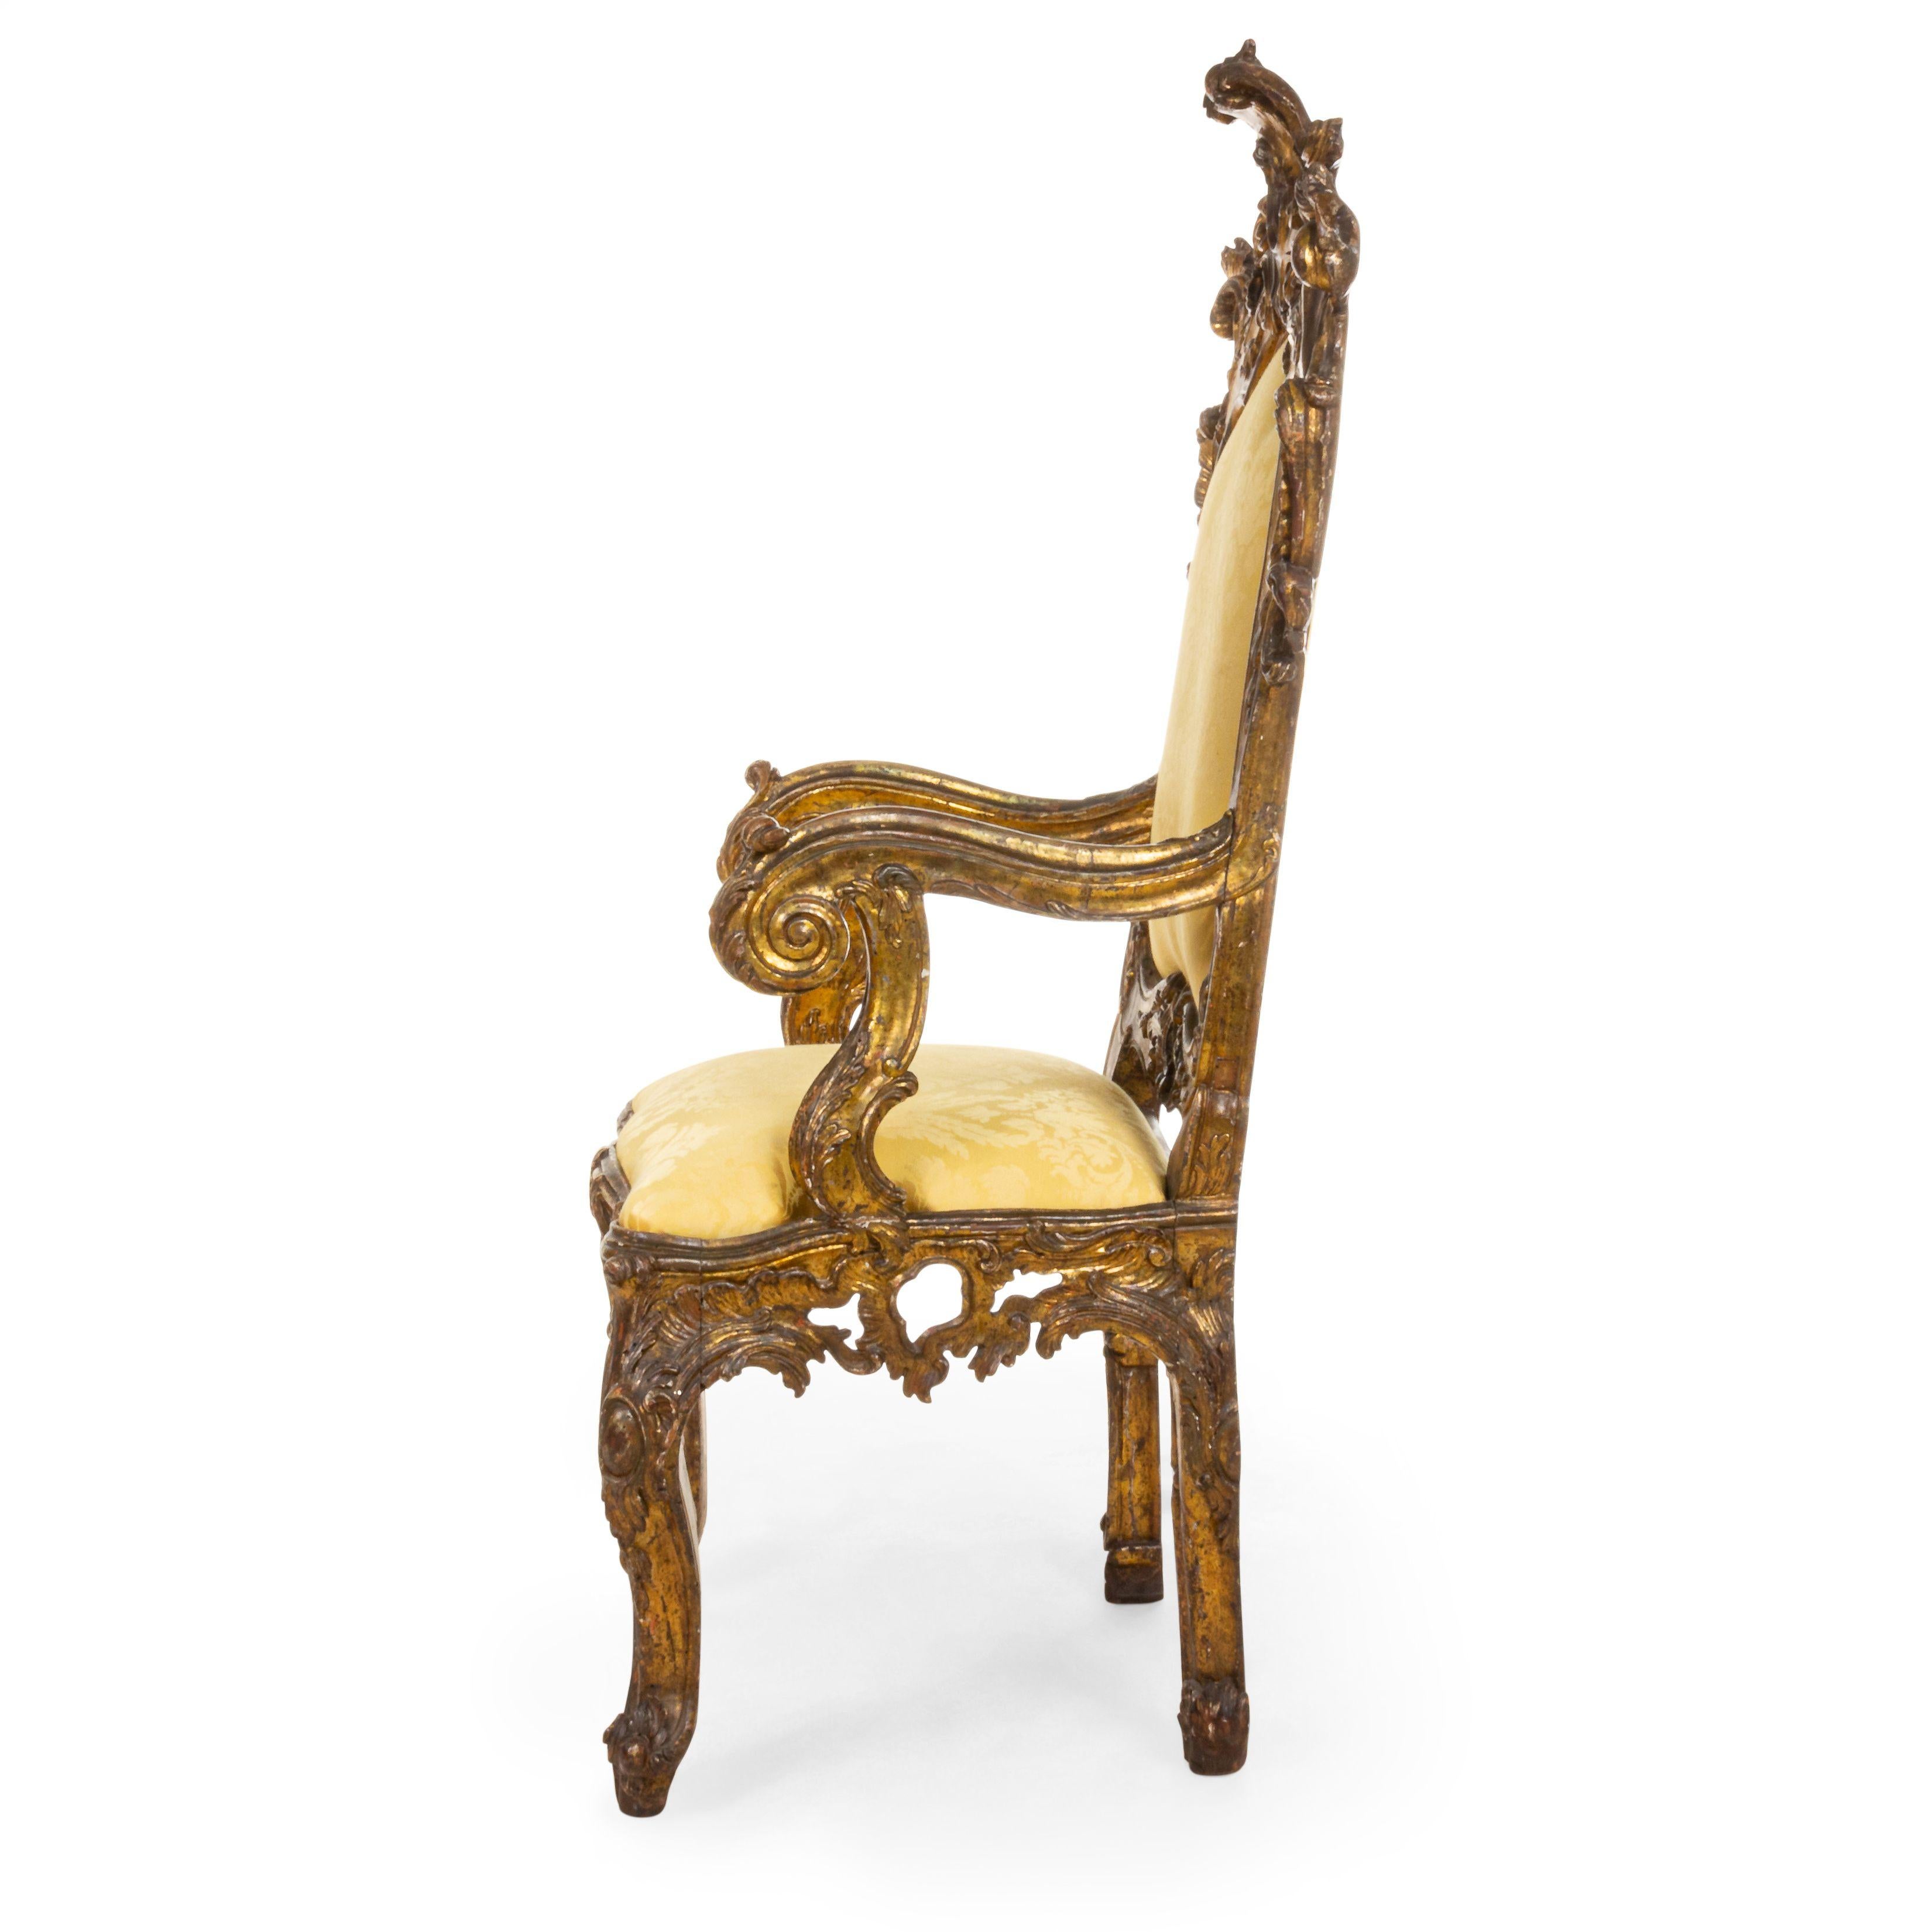 Antique Italian Rococo high back gilt carved throne chairs with gold damask slip seat and back.
 